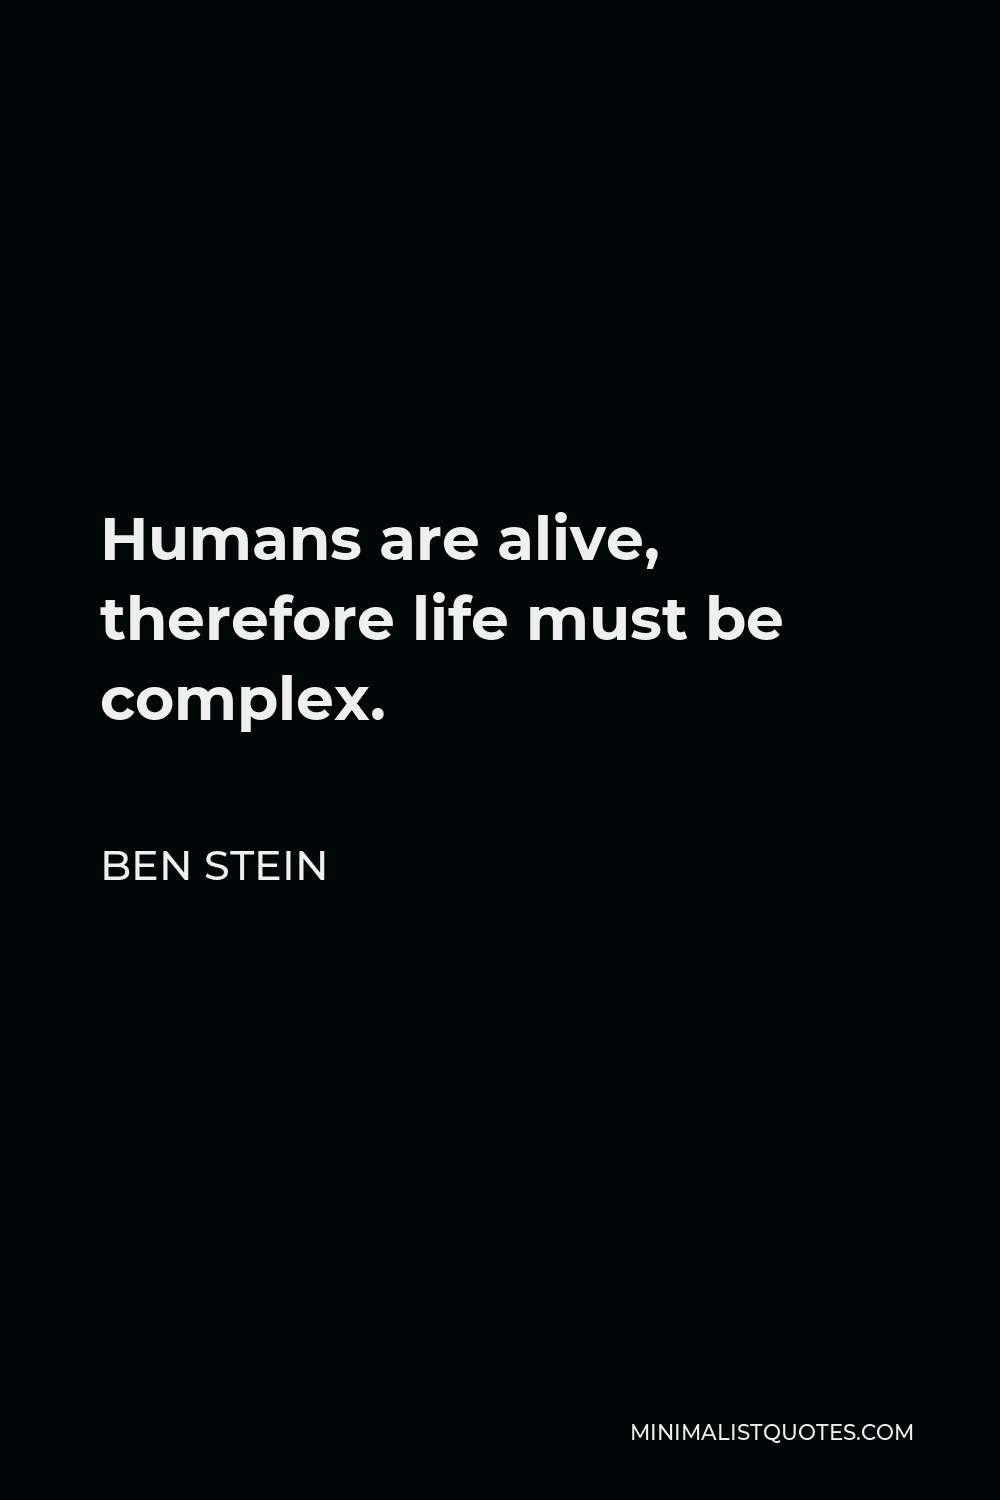 Ben Stein Quote - Humans are alive, therefore life must be complex.